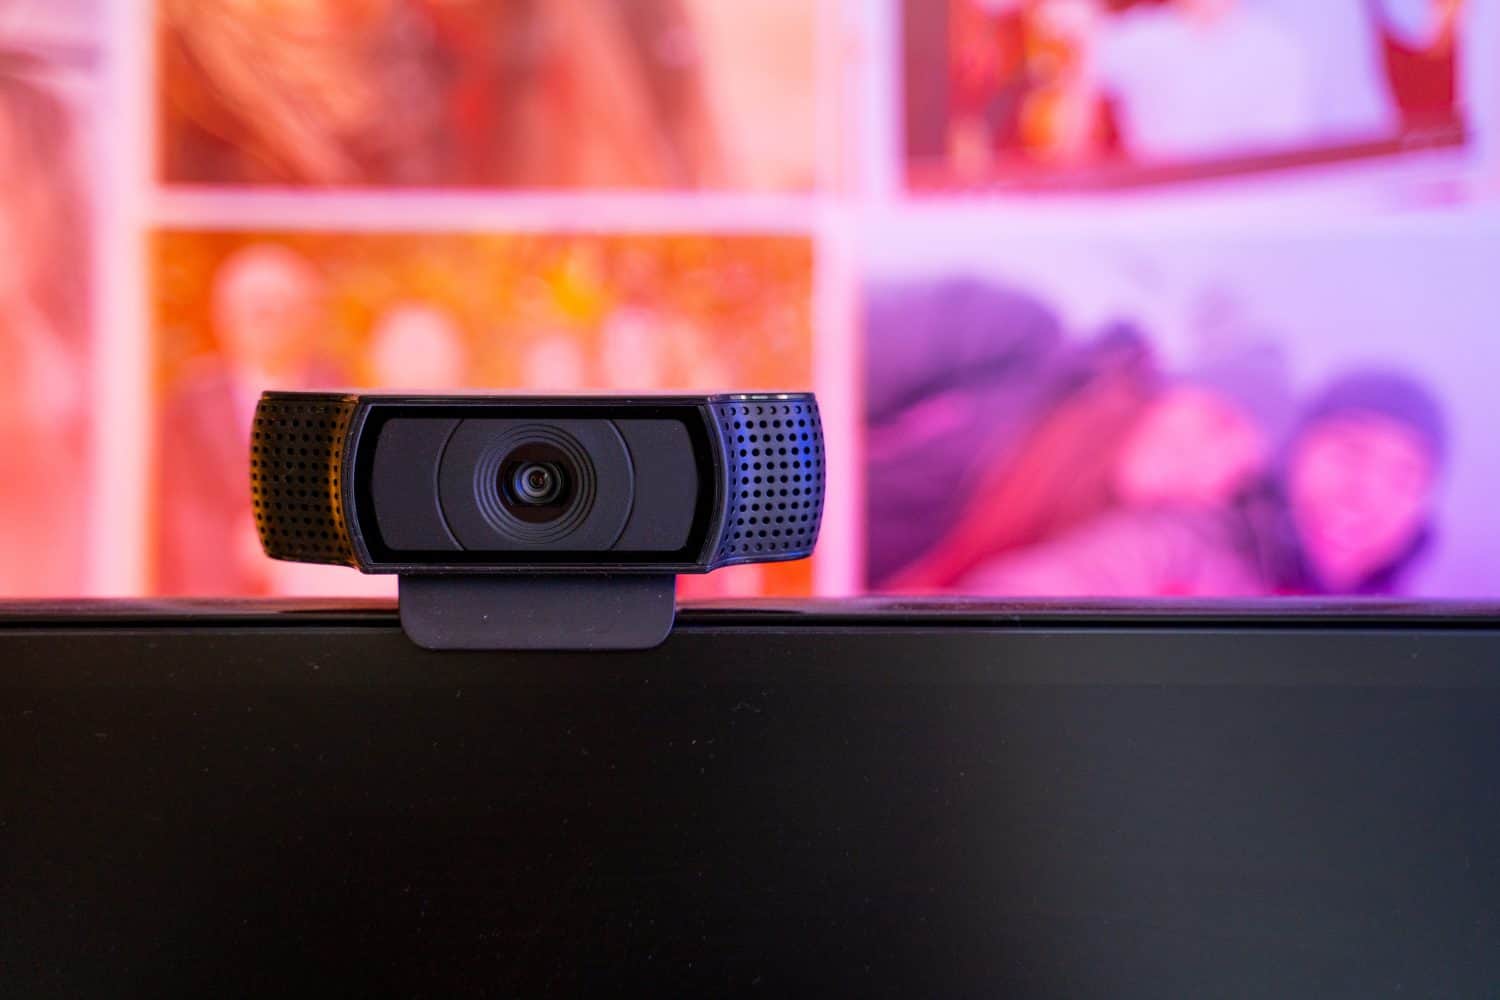 Webcam on top of a monitor for live streaming or video calls